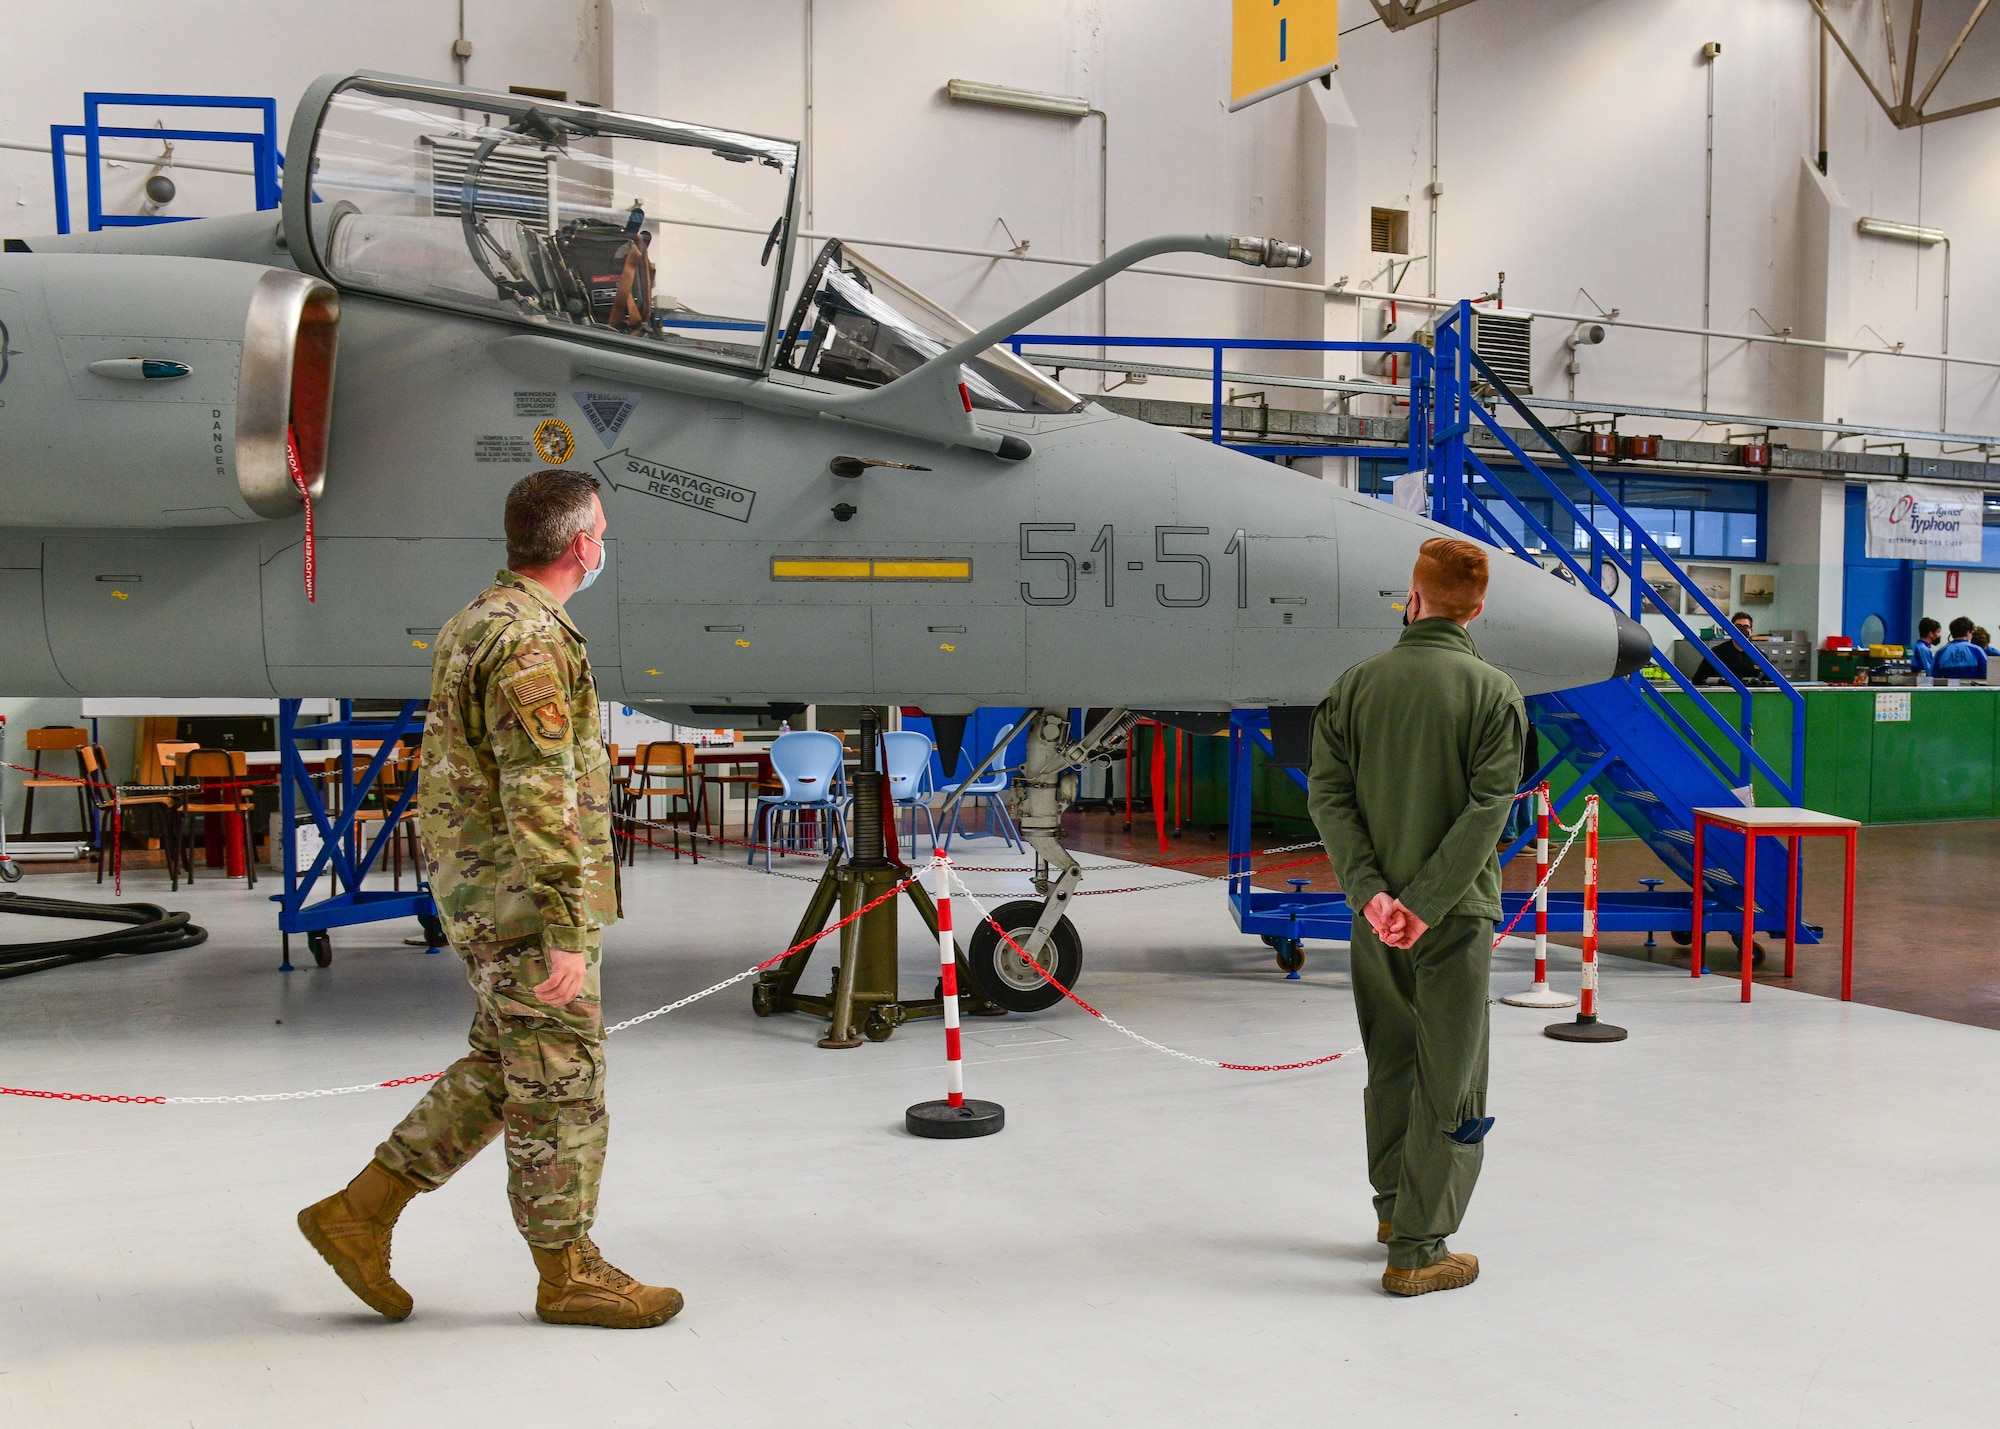 Tech. Sgt. Hunter Newell, 31st Maintenance Group Quality Assurance inspector, left, and U.S. Air Force Capt. Ben Kern, 510th Fighter Squadron F-16 Fighting Falcon pilot, look at an aircraft that’s used for simulations during a visit at the Malignani Aeronautical Institute in Udine, Italy, March 3, 2022. A pilot and maintainer from the 31st Fighter Wing and Col. Marco Schiattoni, Italian base commander, spoke in front of approximately 60 aeronautical high school students and shared their experiences of being in the military. (U.S. Air Force photo by Senior Airman Brooke Moeder)